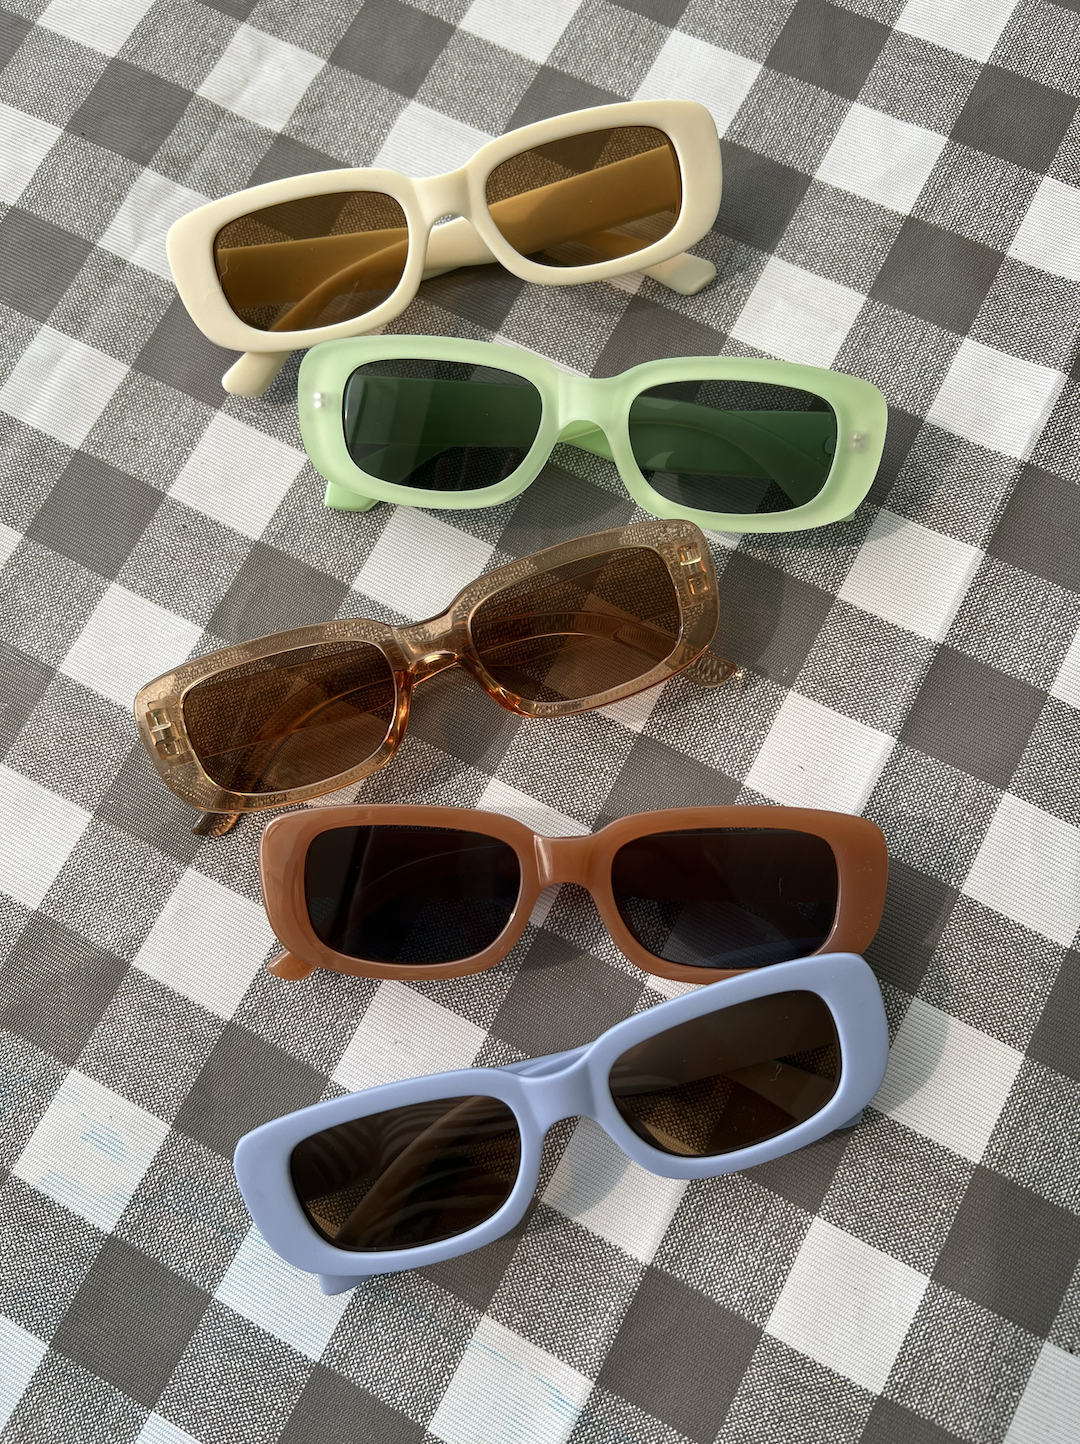 A selection of kids' sunglasses in various colors